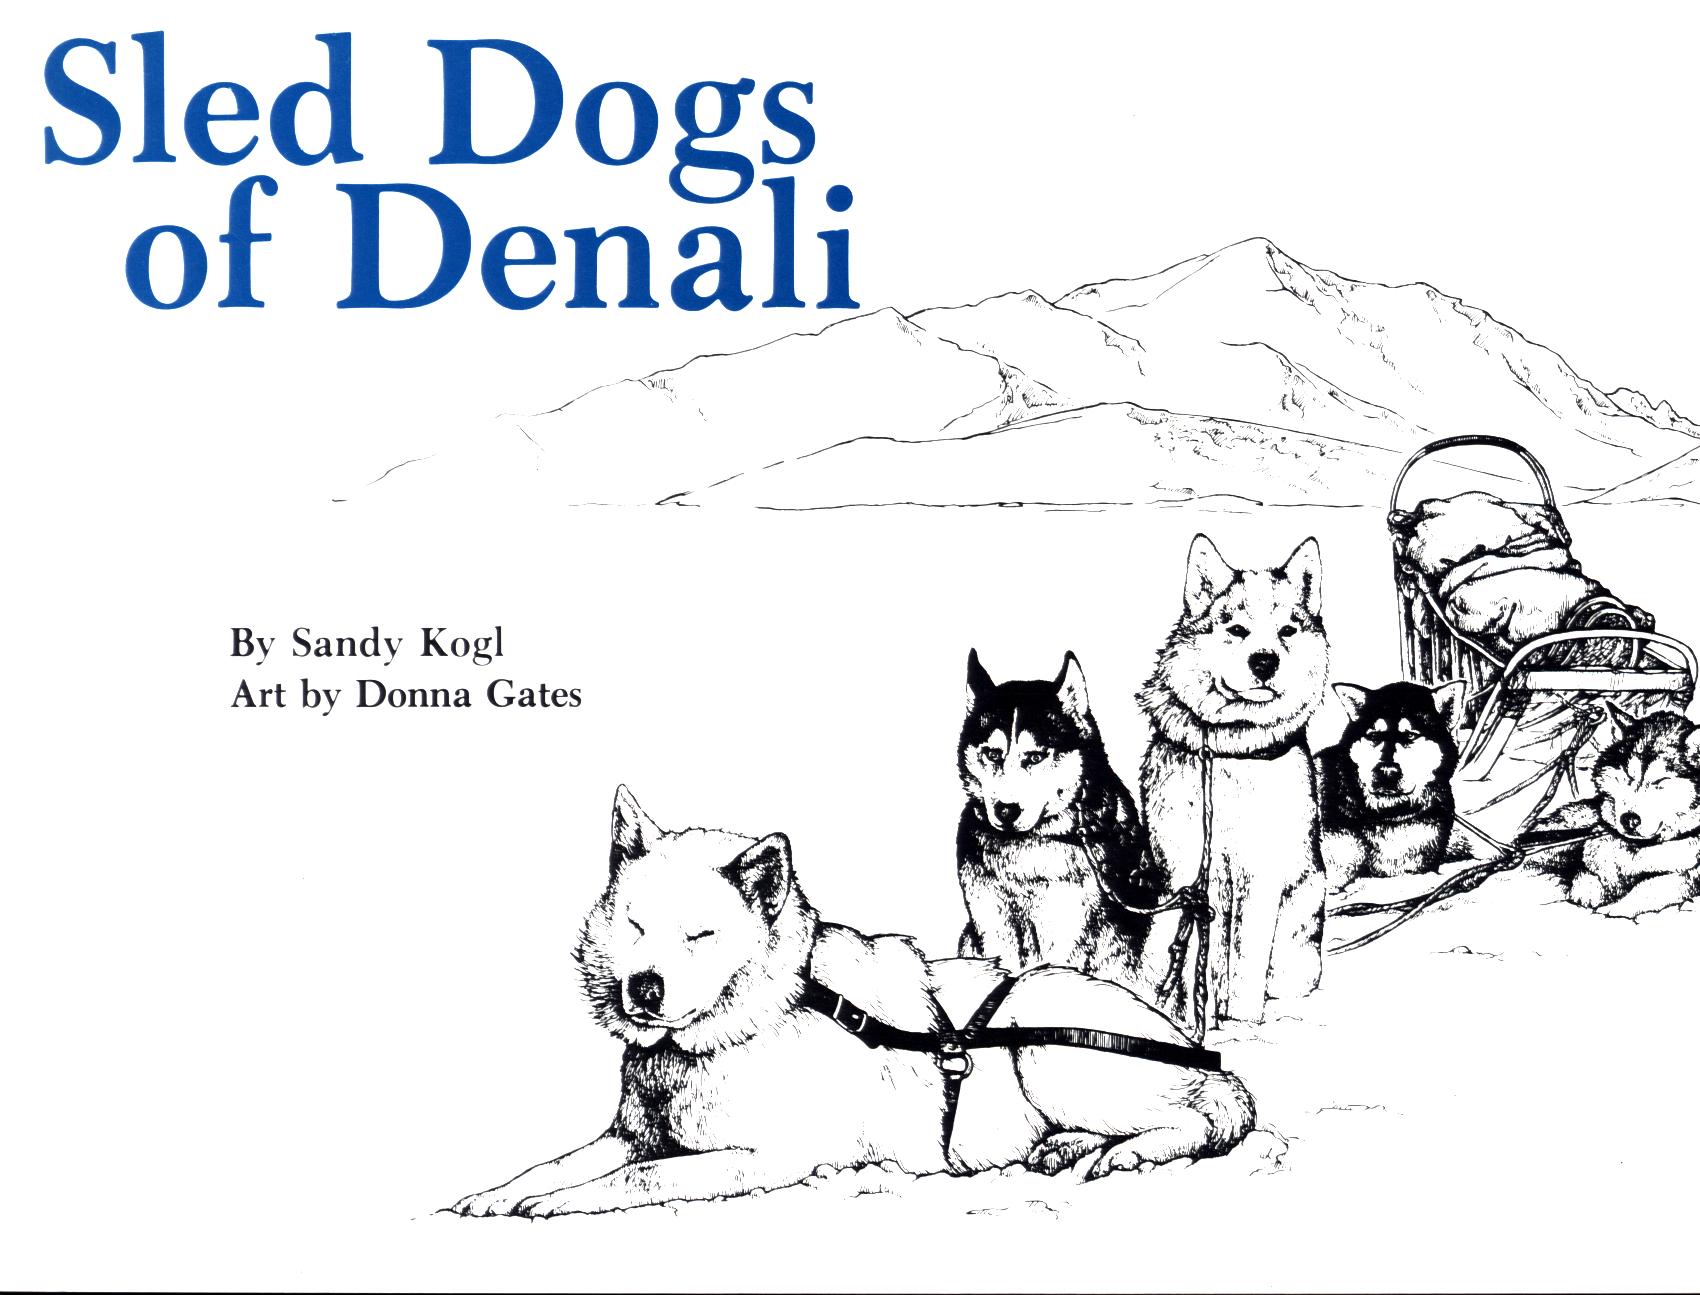 SLED DOGS OF DENALI. 